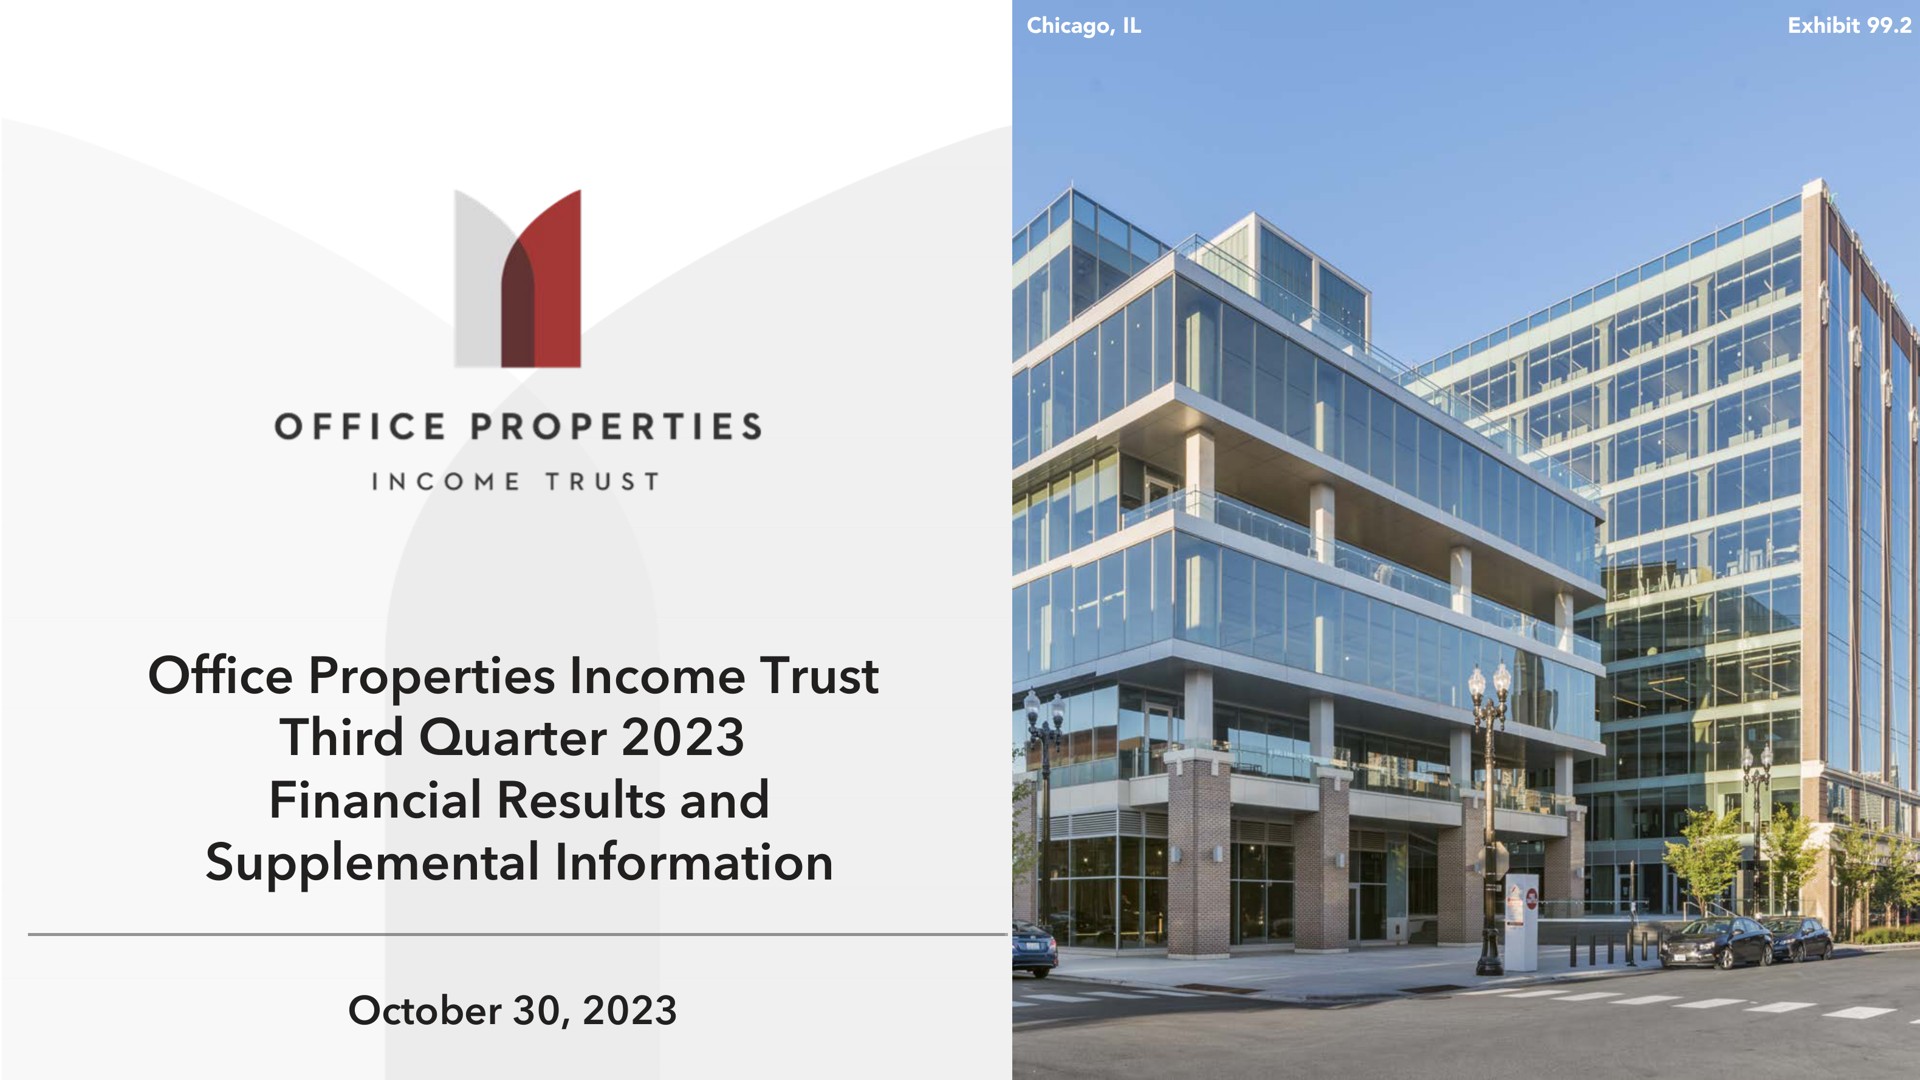 office properties income trust third quarter financial results and supplemental information | Office Properties Income Trust